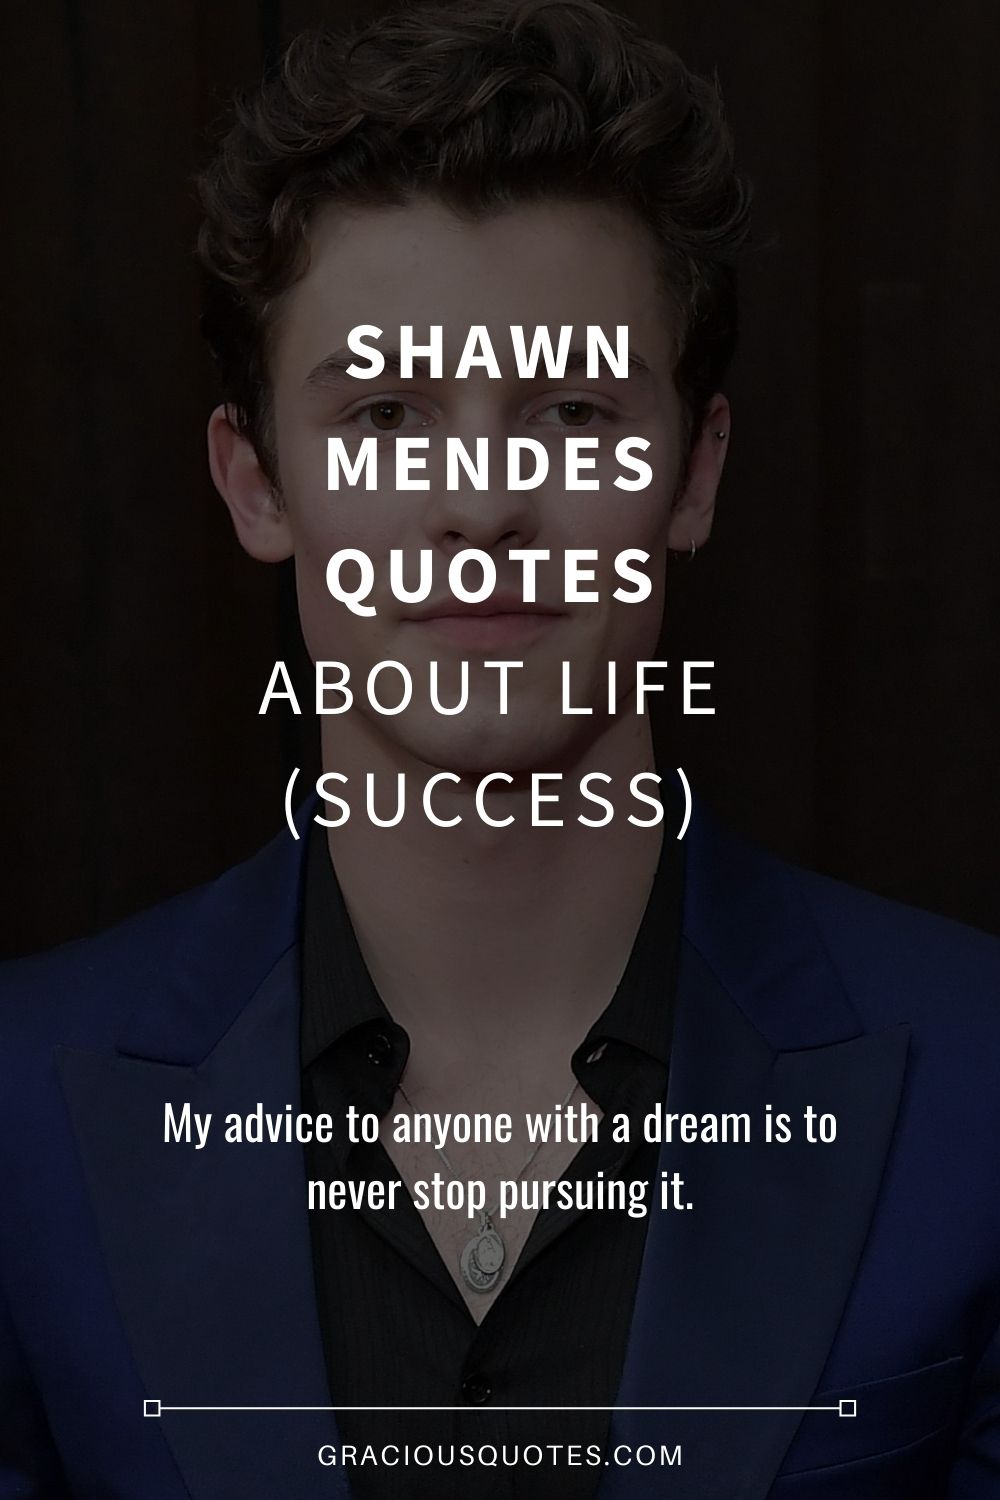 Shawn Mendes Quotes About Life (SUCCESS) - Gracious Quotes